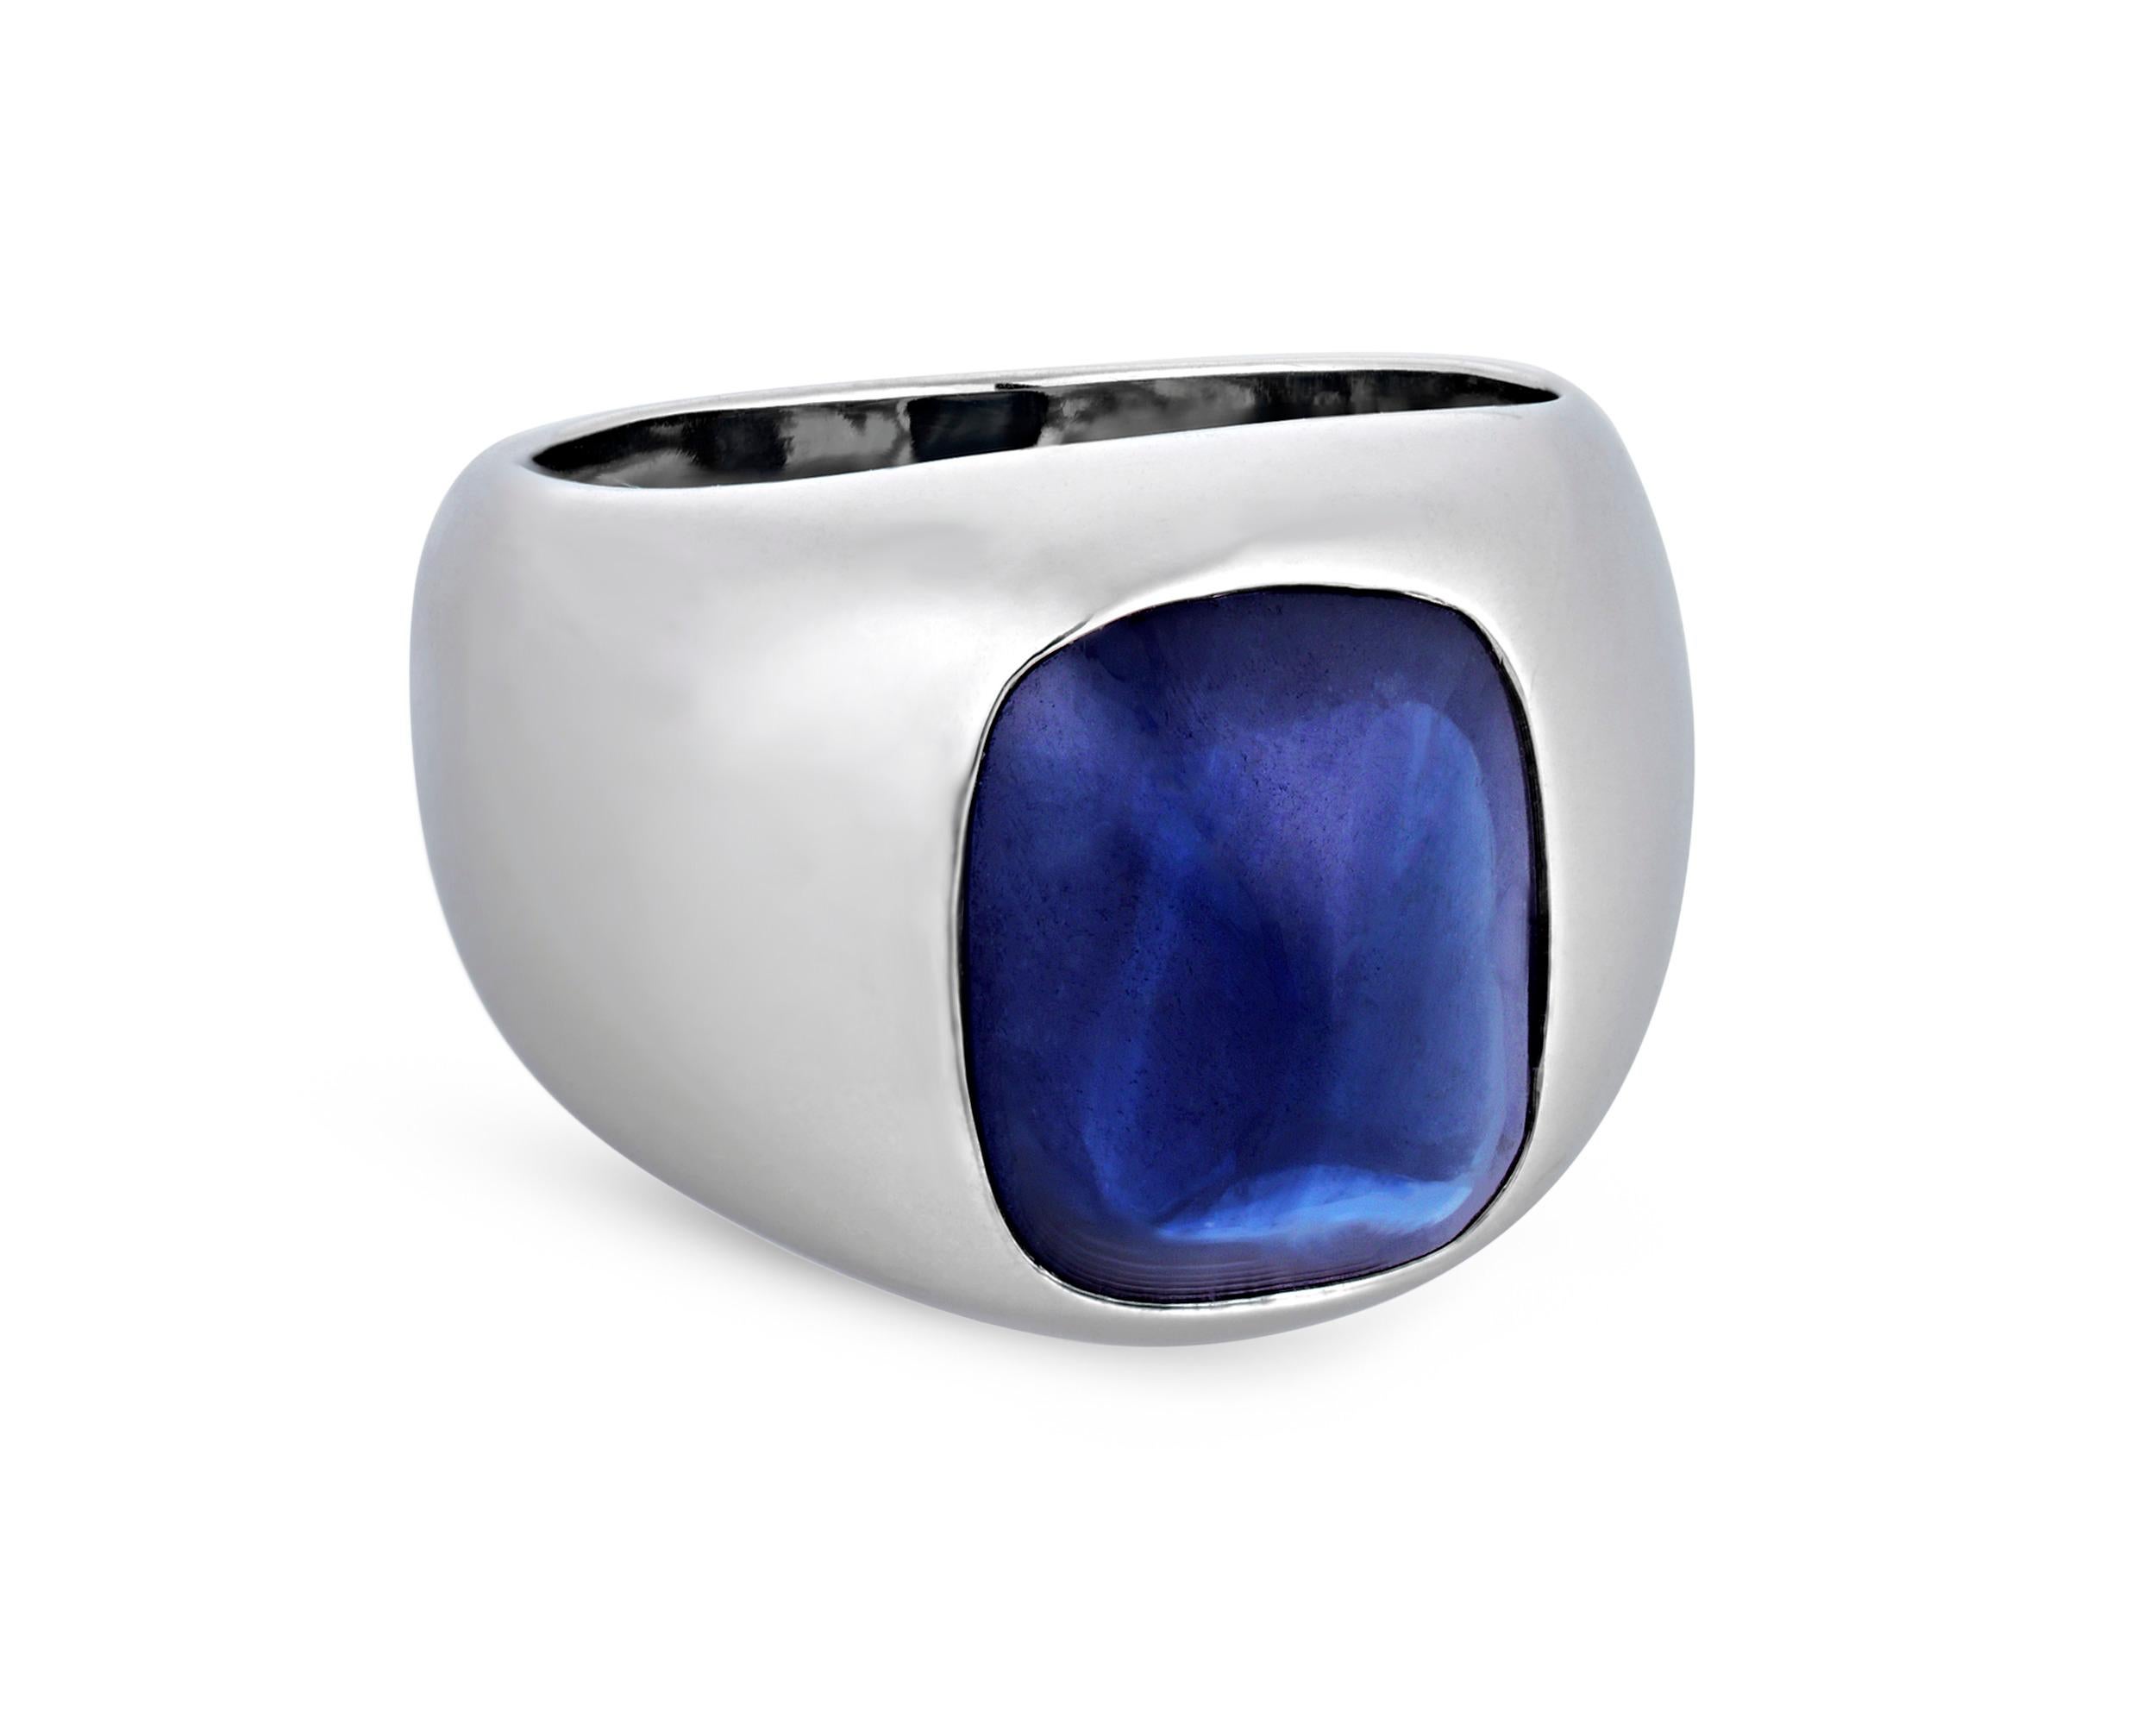 An impeccable “sugarloaf” cabochon sapphire displays a rich azure hue in this men’s ring. Certified by the GemResearch SwissLab to be of Ceylon origin and weighting 7.64 carats, this handsome blue jewel makes an impactful statement. Set in